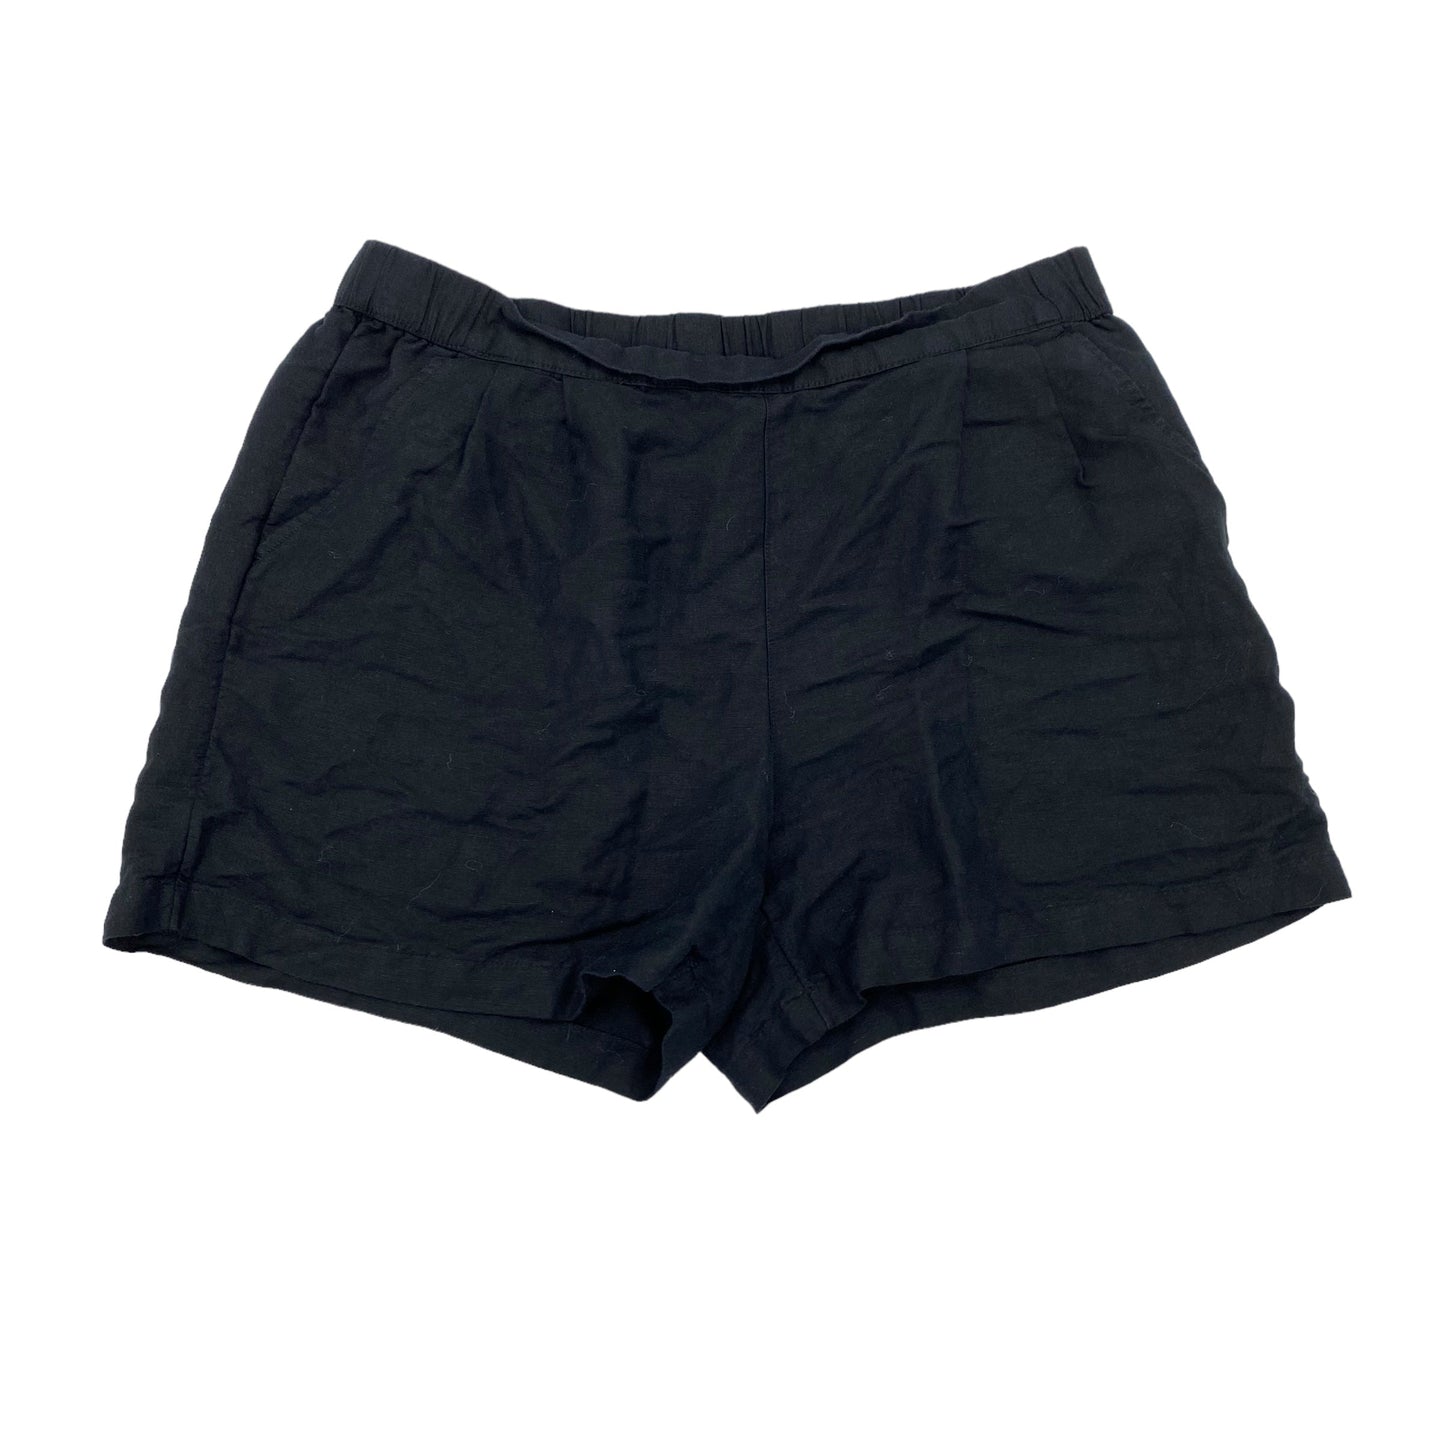 BLACK A NEW DAY SHORTS, Size XL